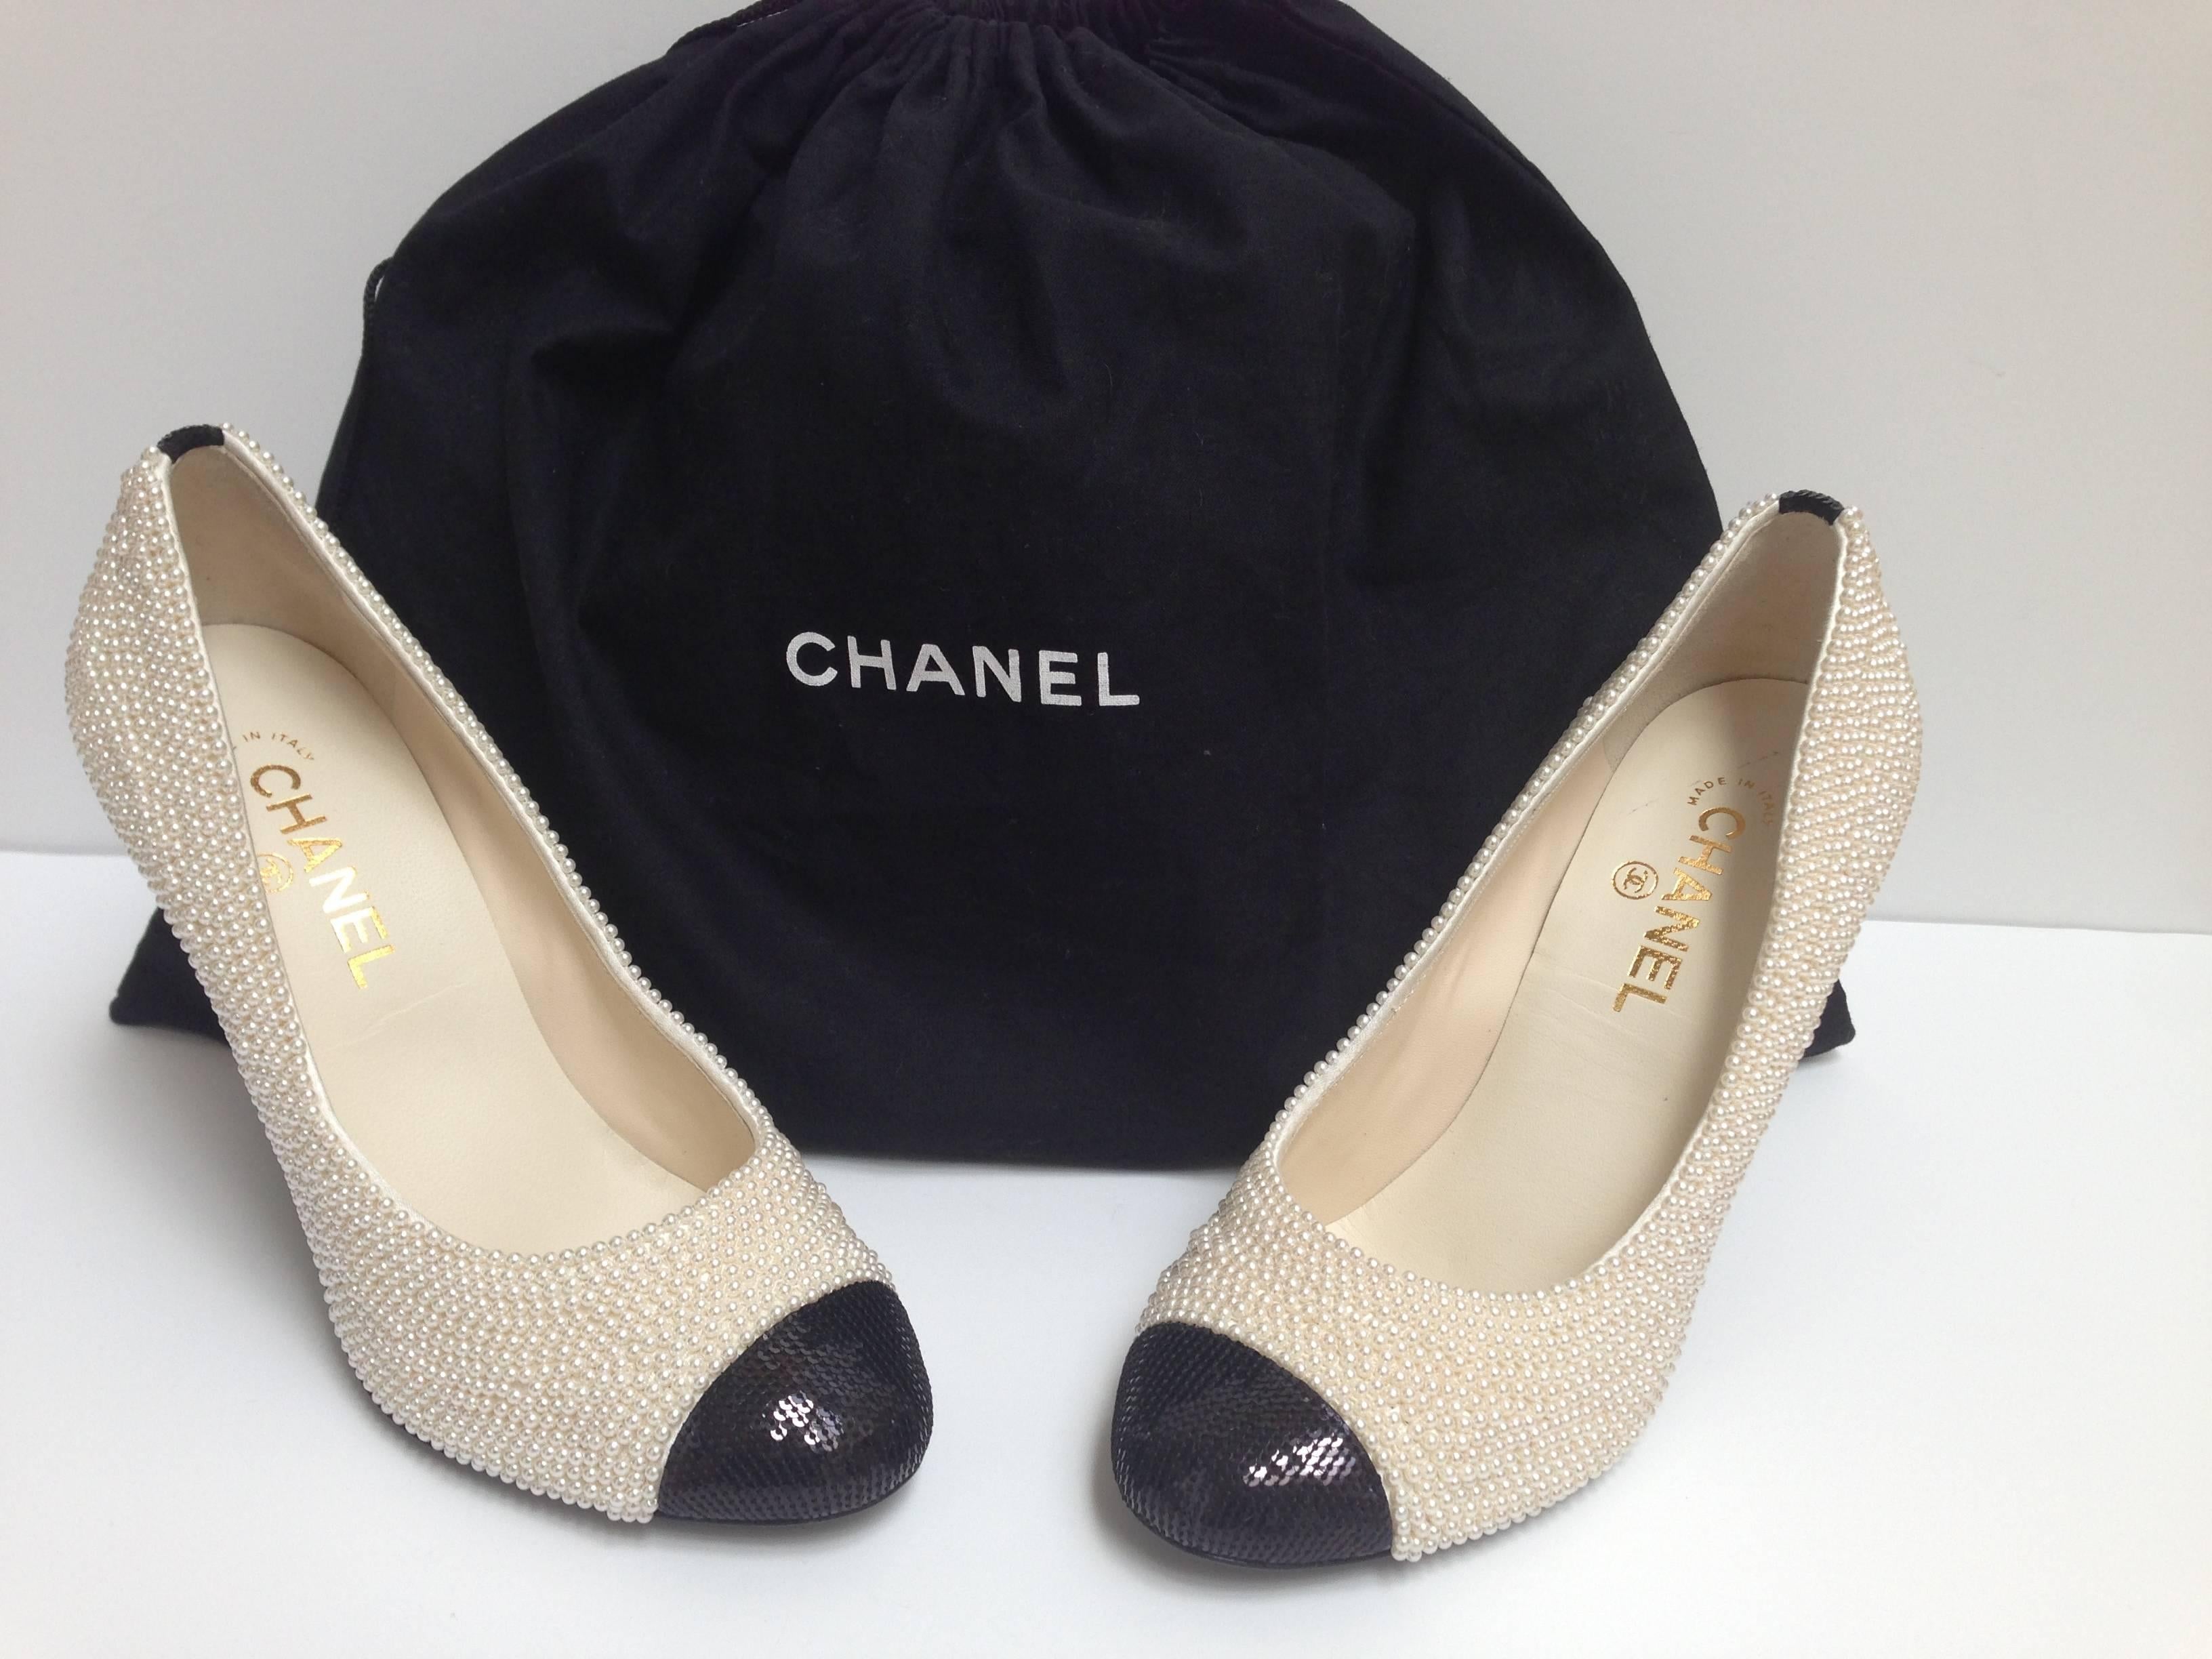 Authentic CHANEL Pearl Encrusted Spectator Pumps  
Size 40 ITA / 9.5-10 US (please refer to measurements below)
Retail: $1450,-   Sold Out

These two-toned satin pumps are covered in elegant ivory pearls and have a black sequin cap toe. The heel